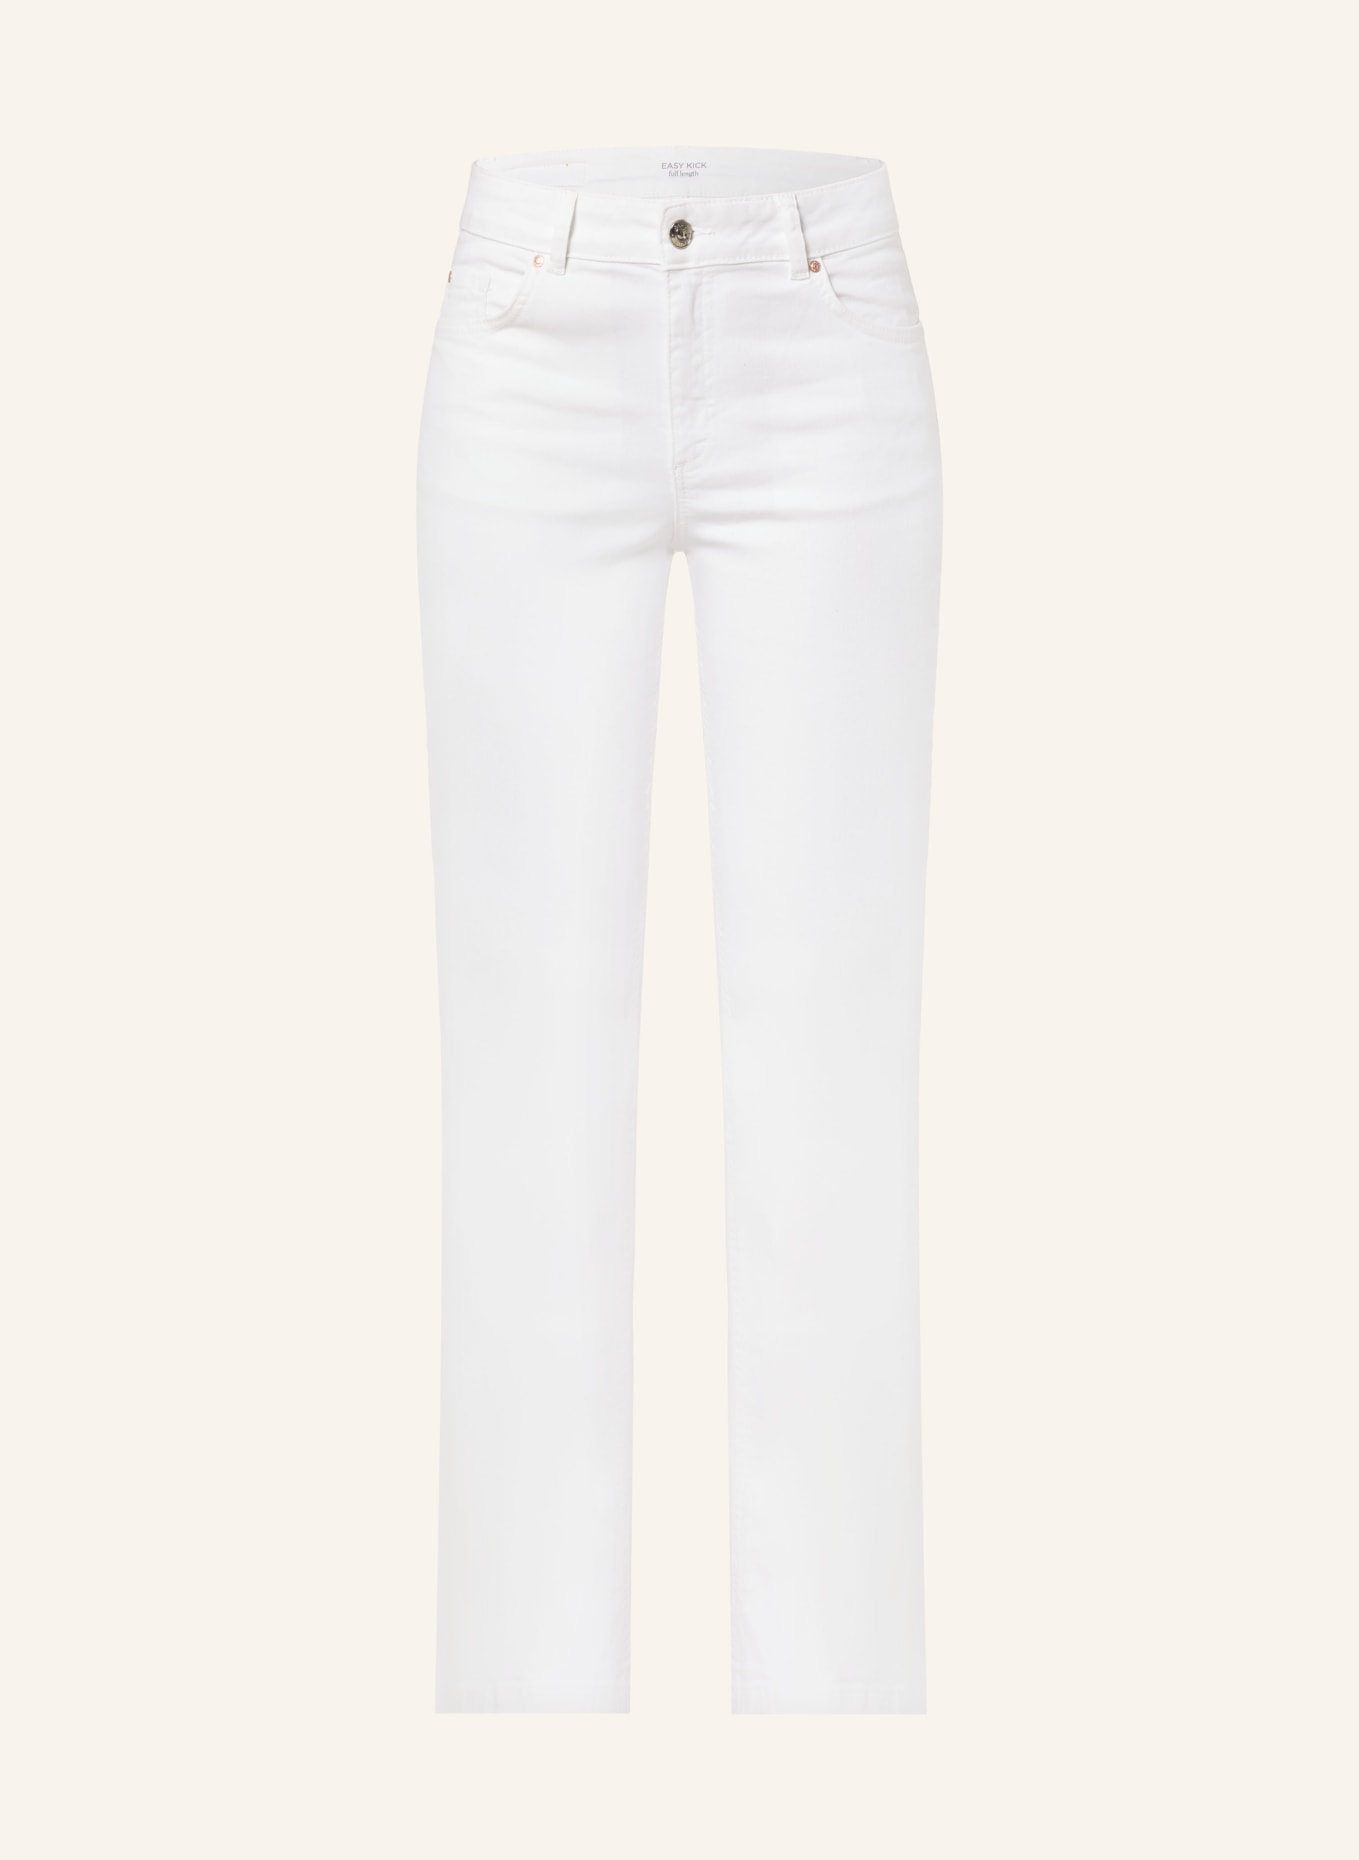 oui Flared Jeans, Farbe: WEISS (Bild 1)